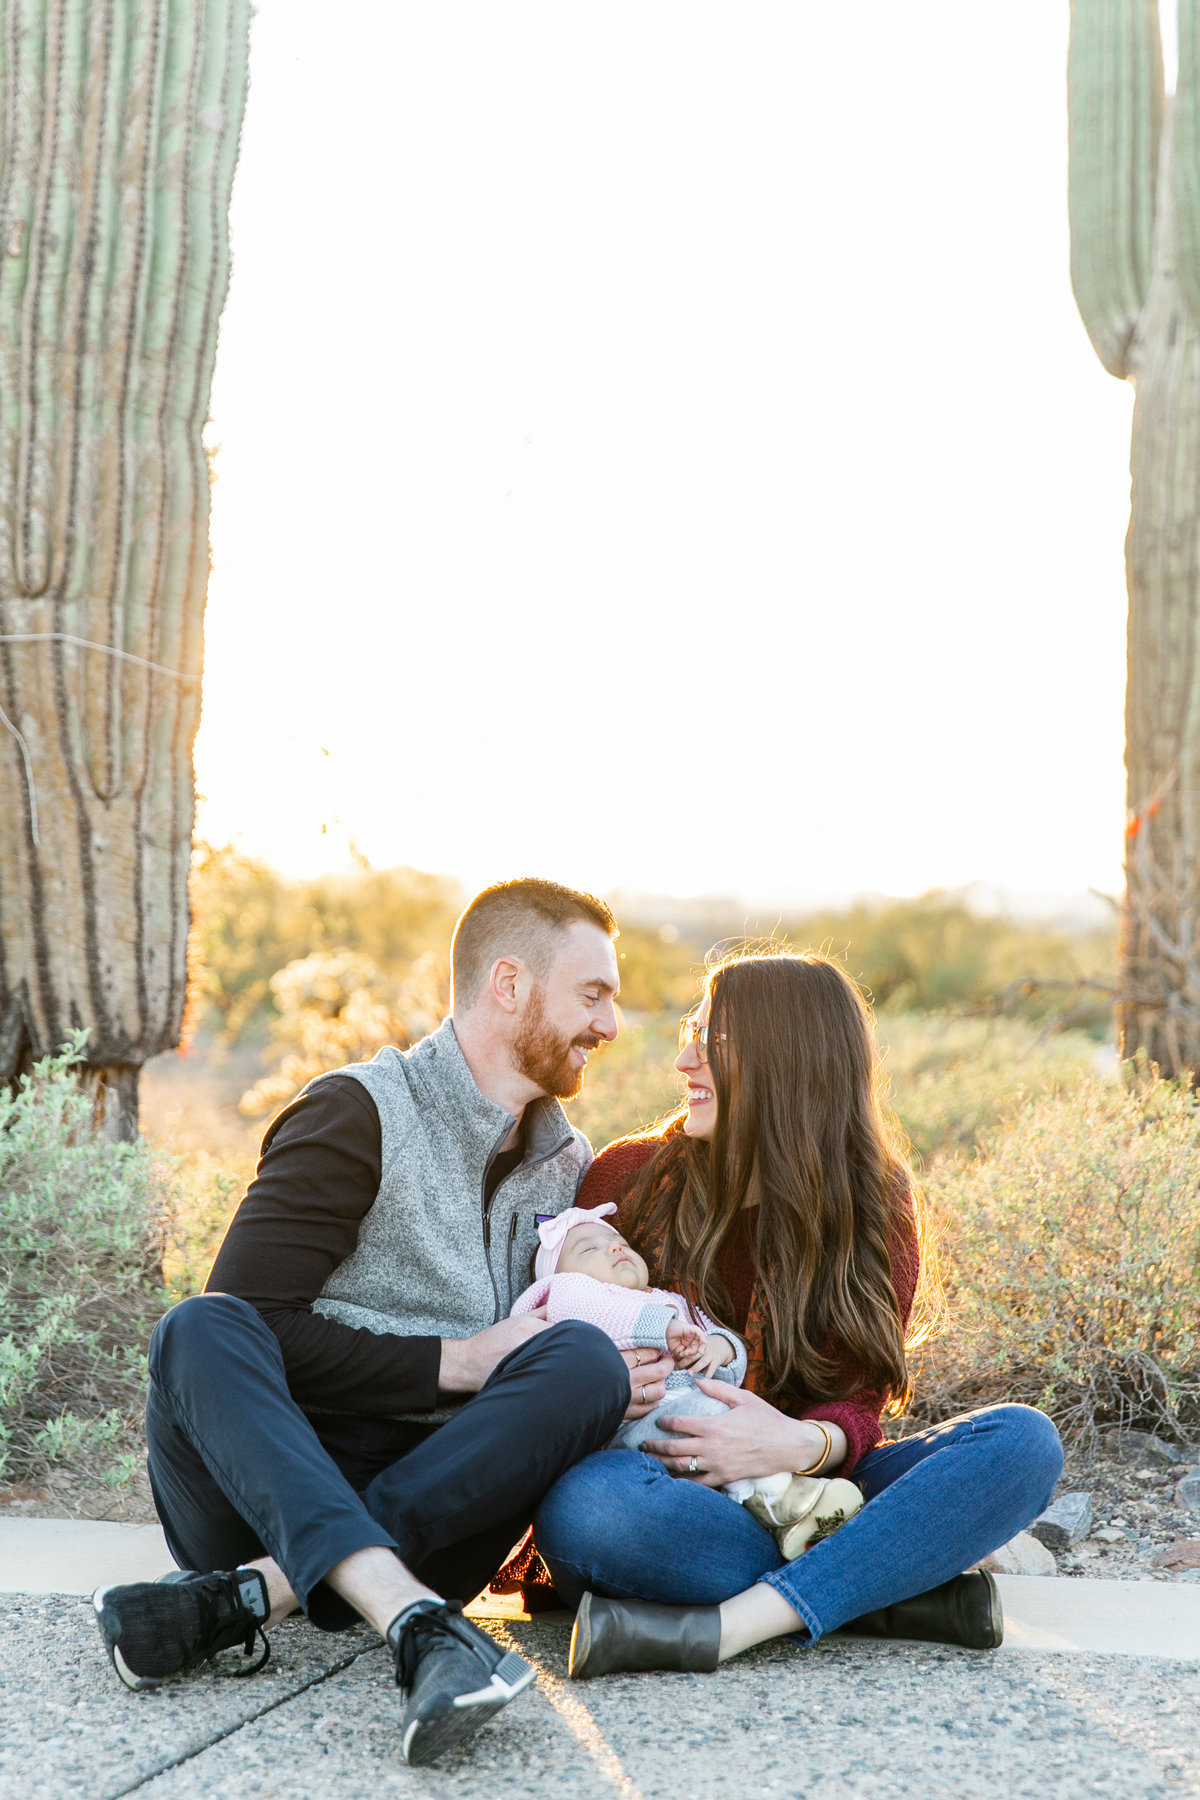 Karlie Colleen Photography - Scottsdale Family Photography - Lauren & Family-151